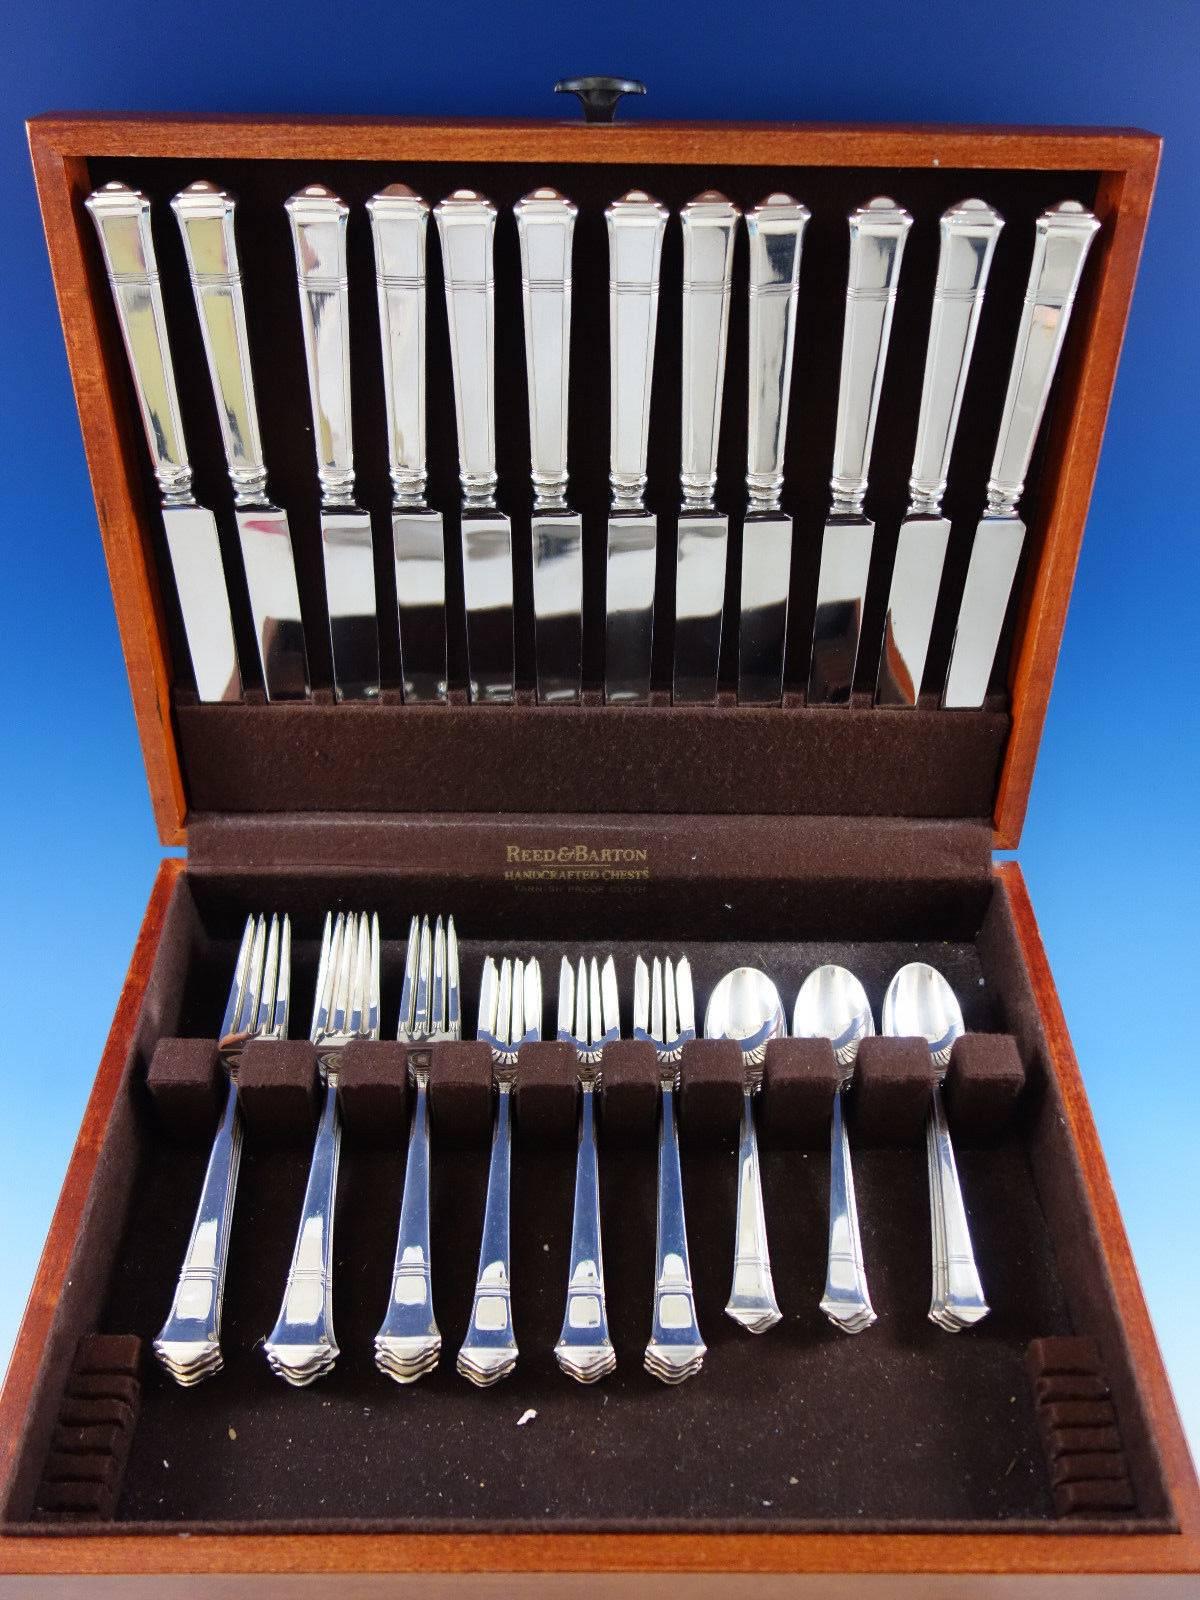 Dinner size Windham by Tiffany & Co. sterling silver flatware set - 48 pieces. This set includes: 12 Dinner Size Knives, 10 1/4